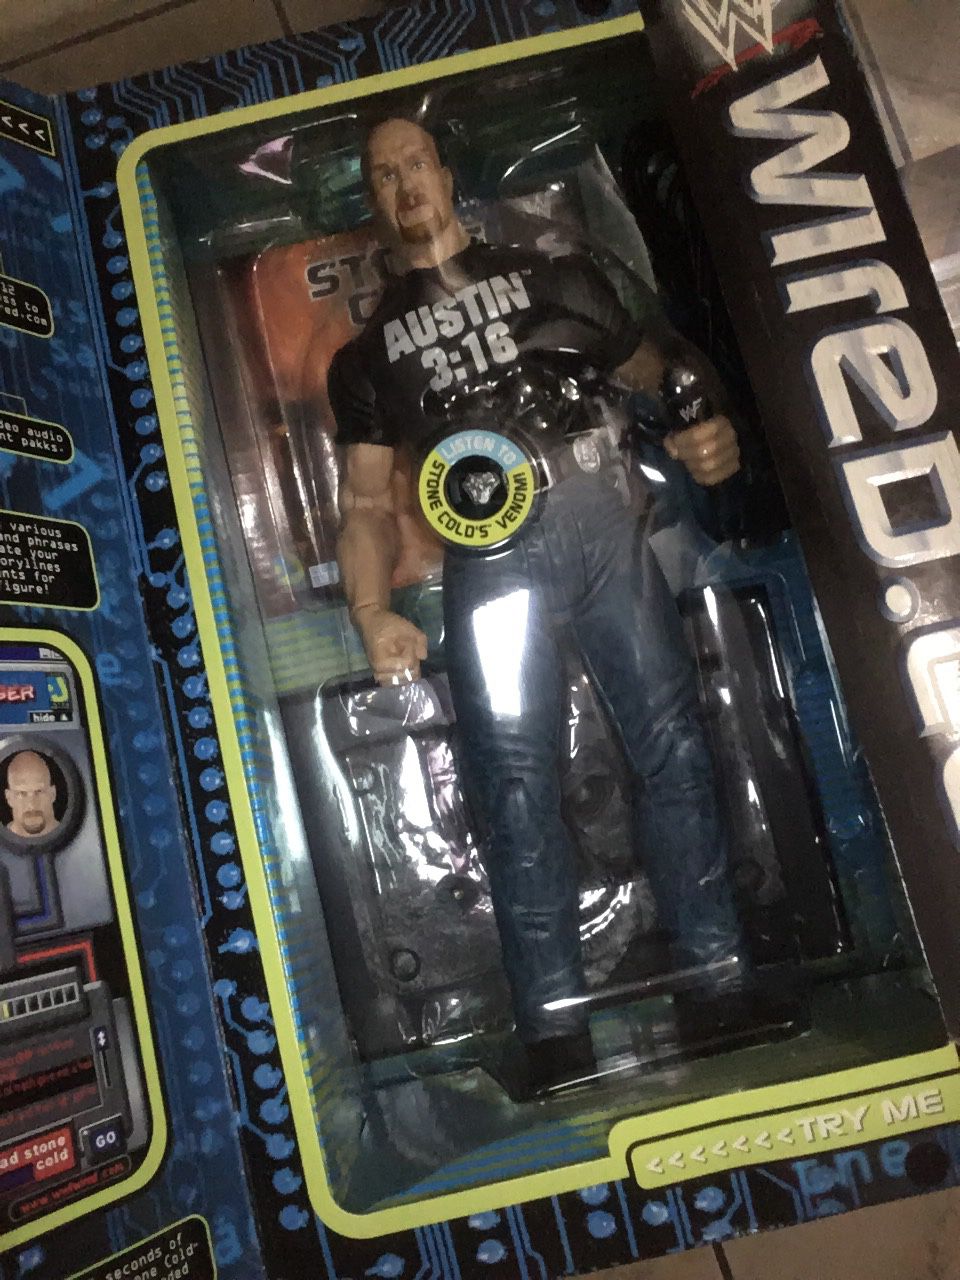 1999 WWF WWE Stone Cold Steve Austin Wrestling Figure Old School Doll Collectable 